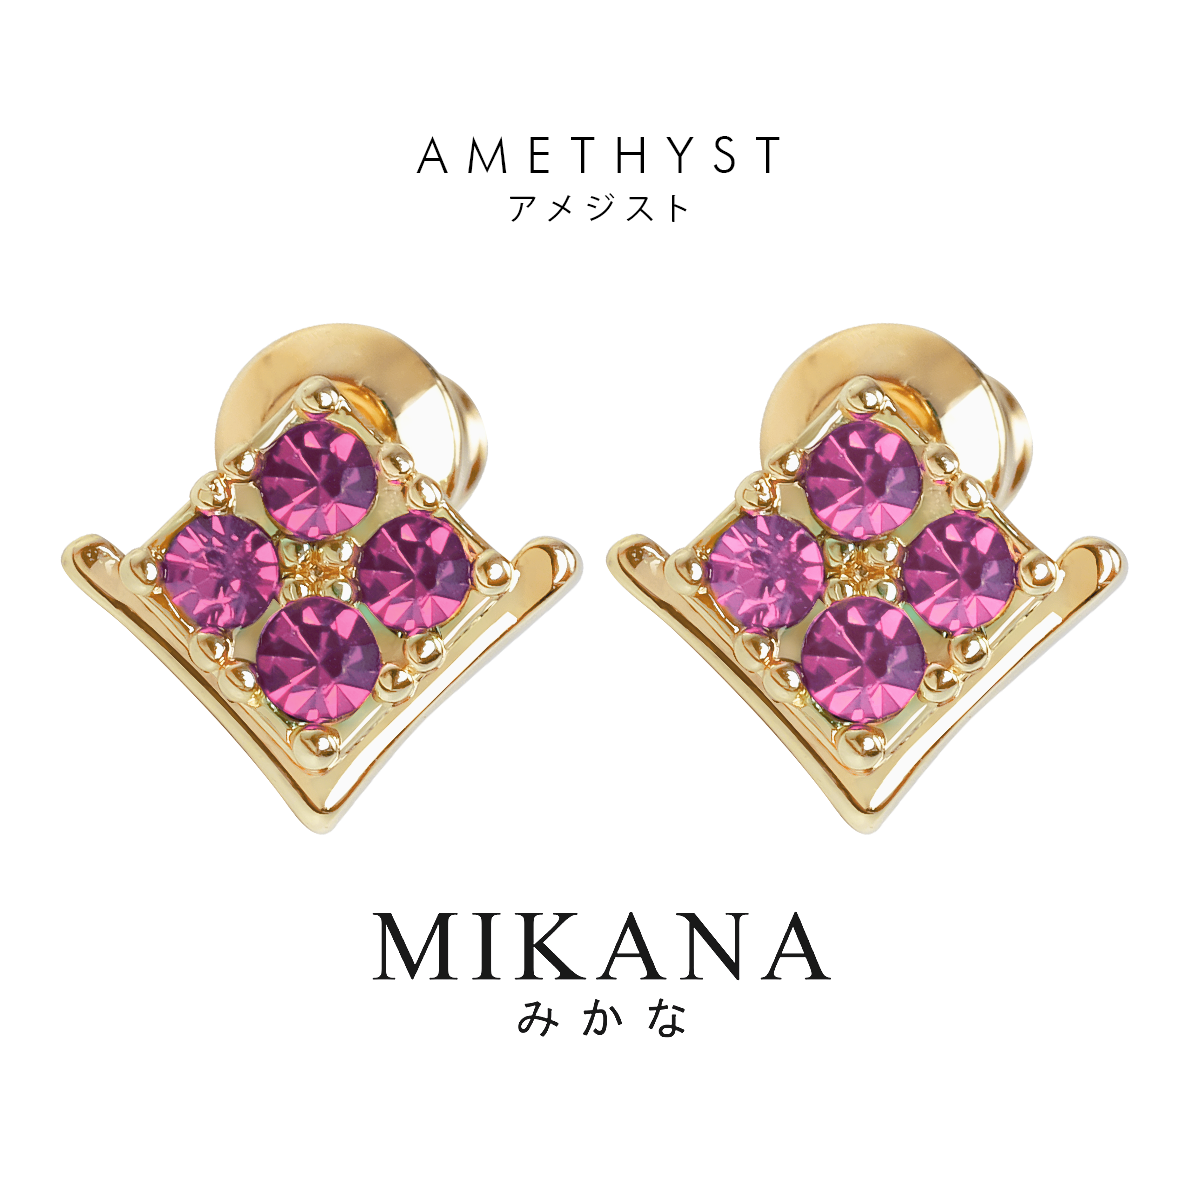 Mikana Birthstone Stud Earrings Collection Daily Fashion Accessories ...